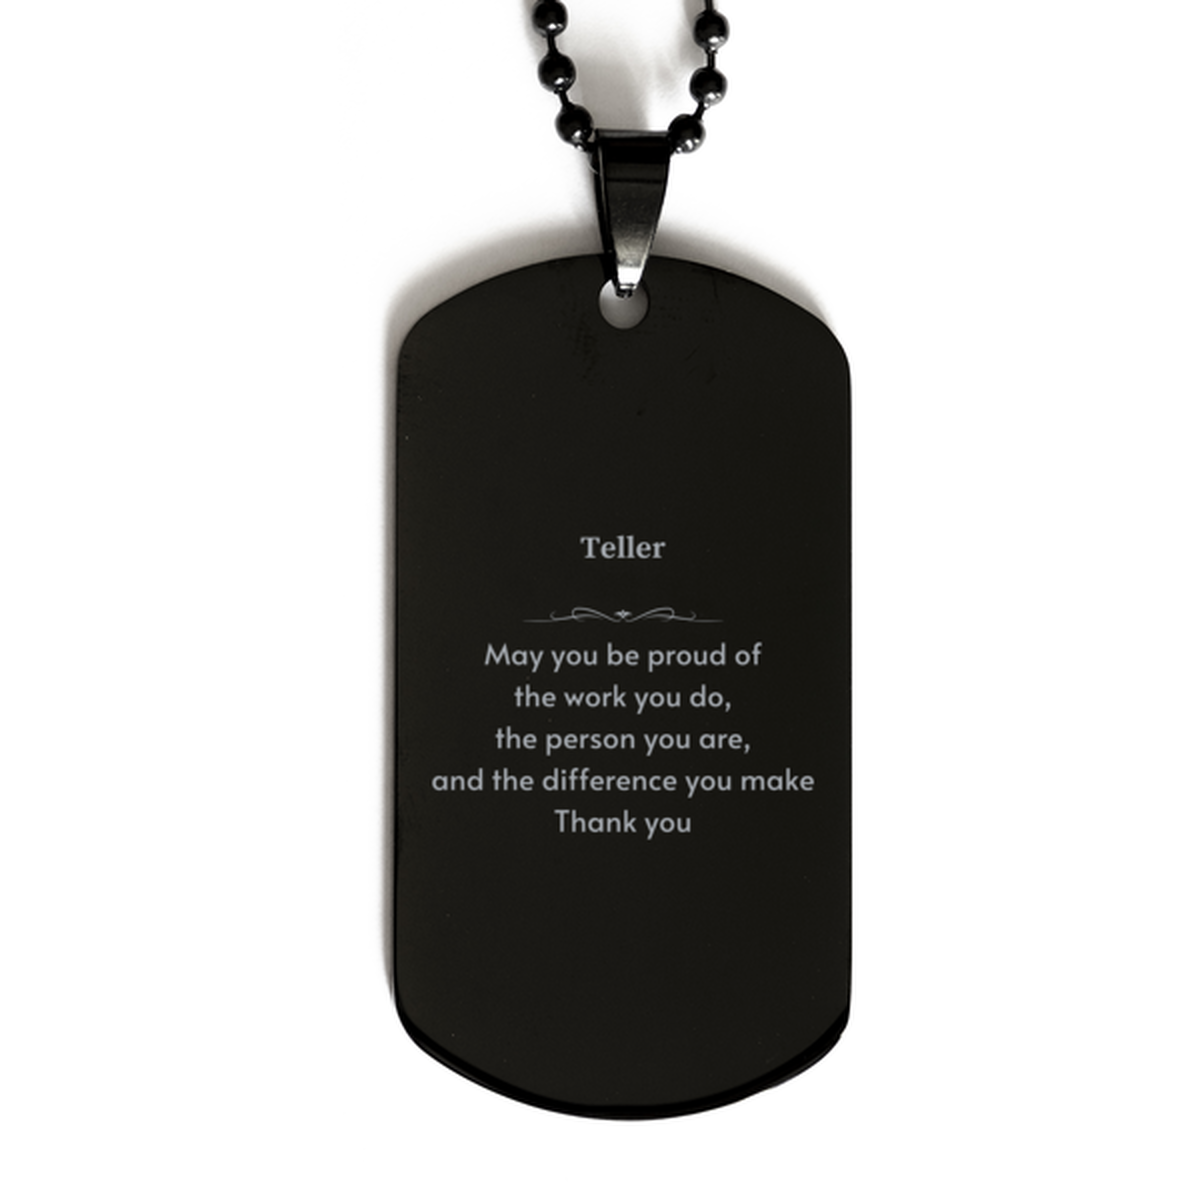 Heartwarming Black Dog Tag Retirement Coworkers Gifts for Teller, Teller May You be proud of the work you do, the person you are Gifts for Boss Men Women Friends